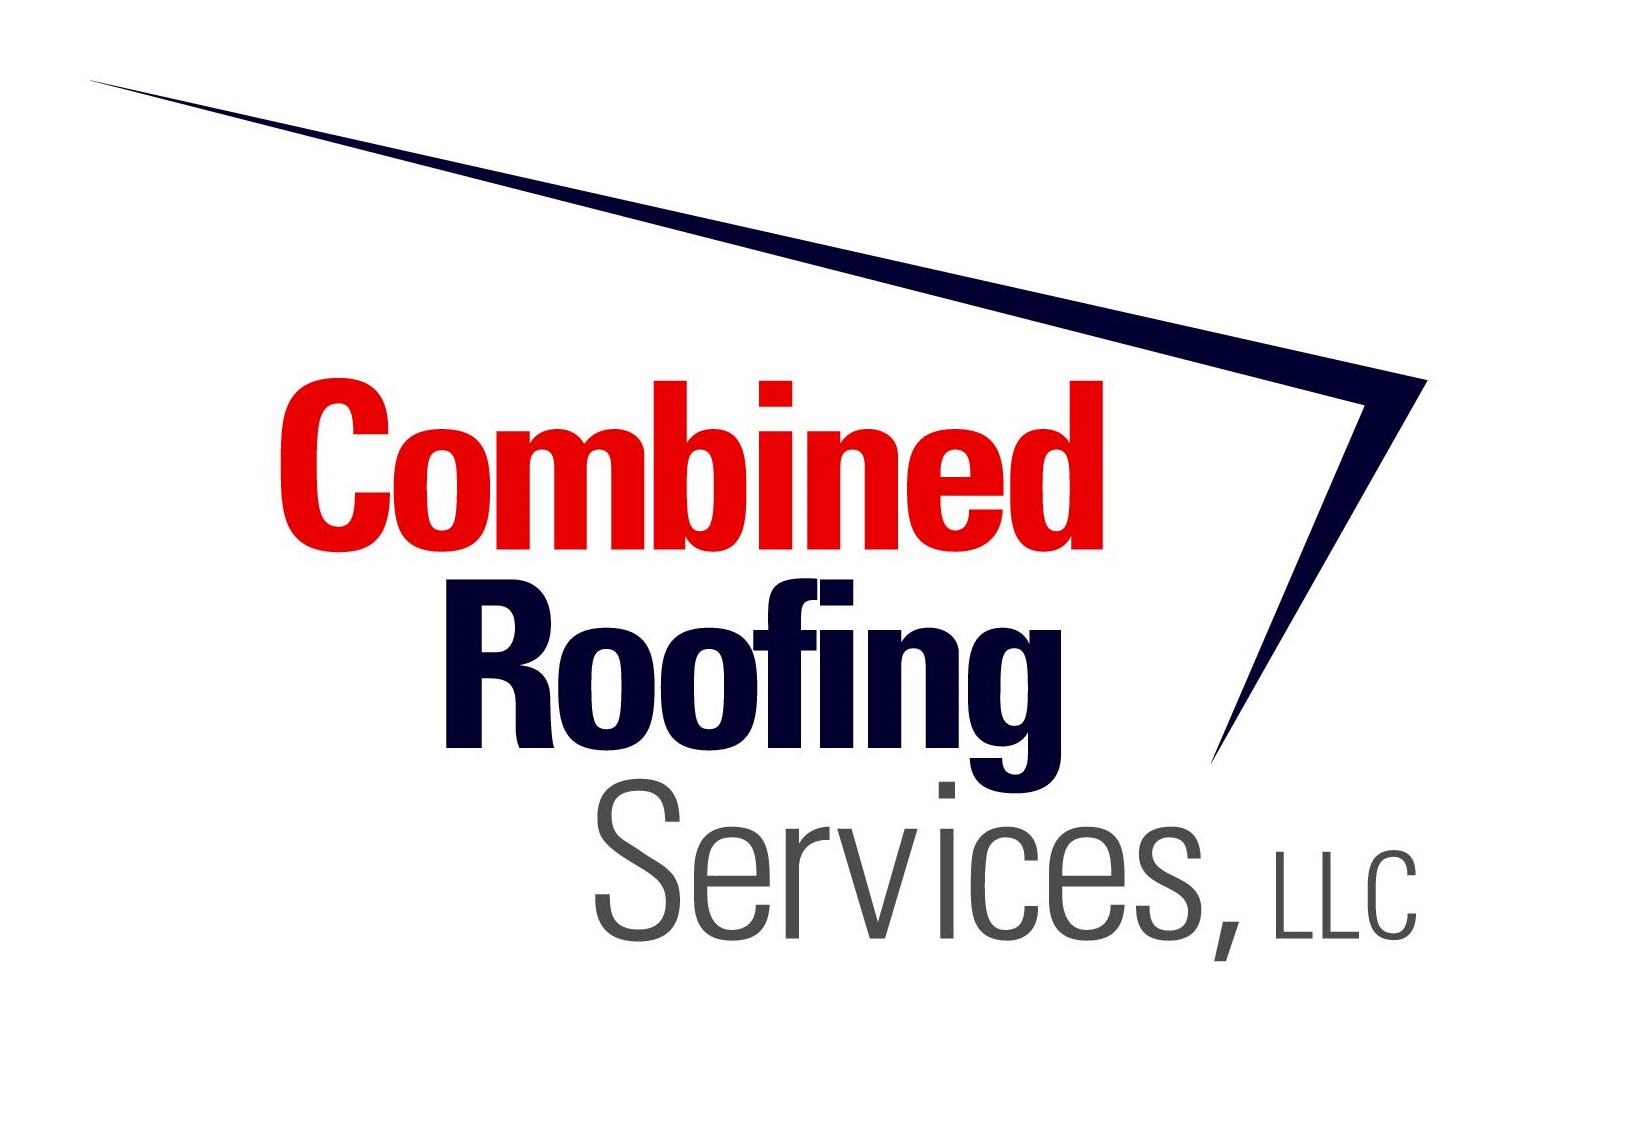 Combined Roofing Services